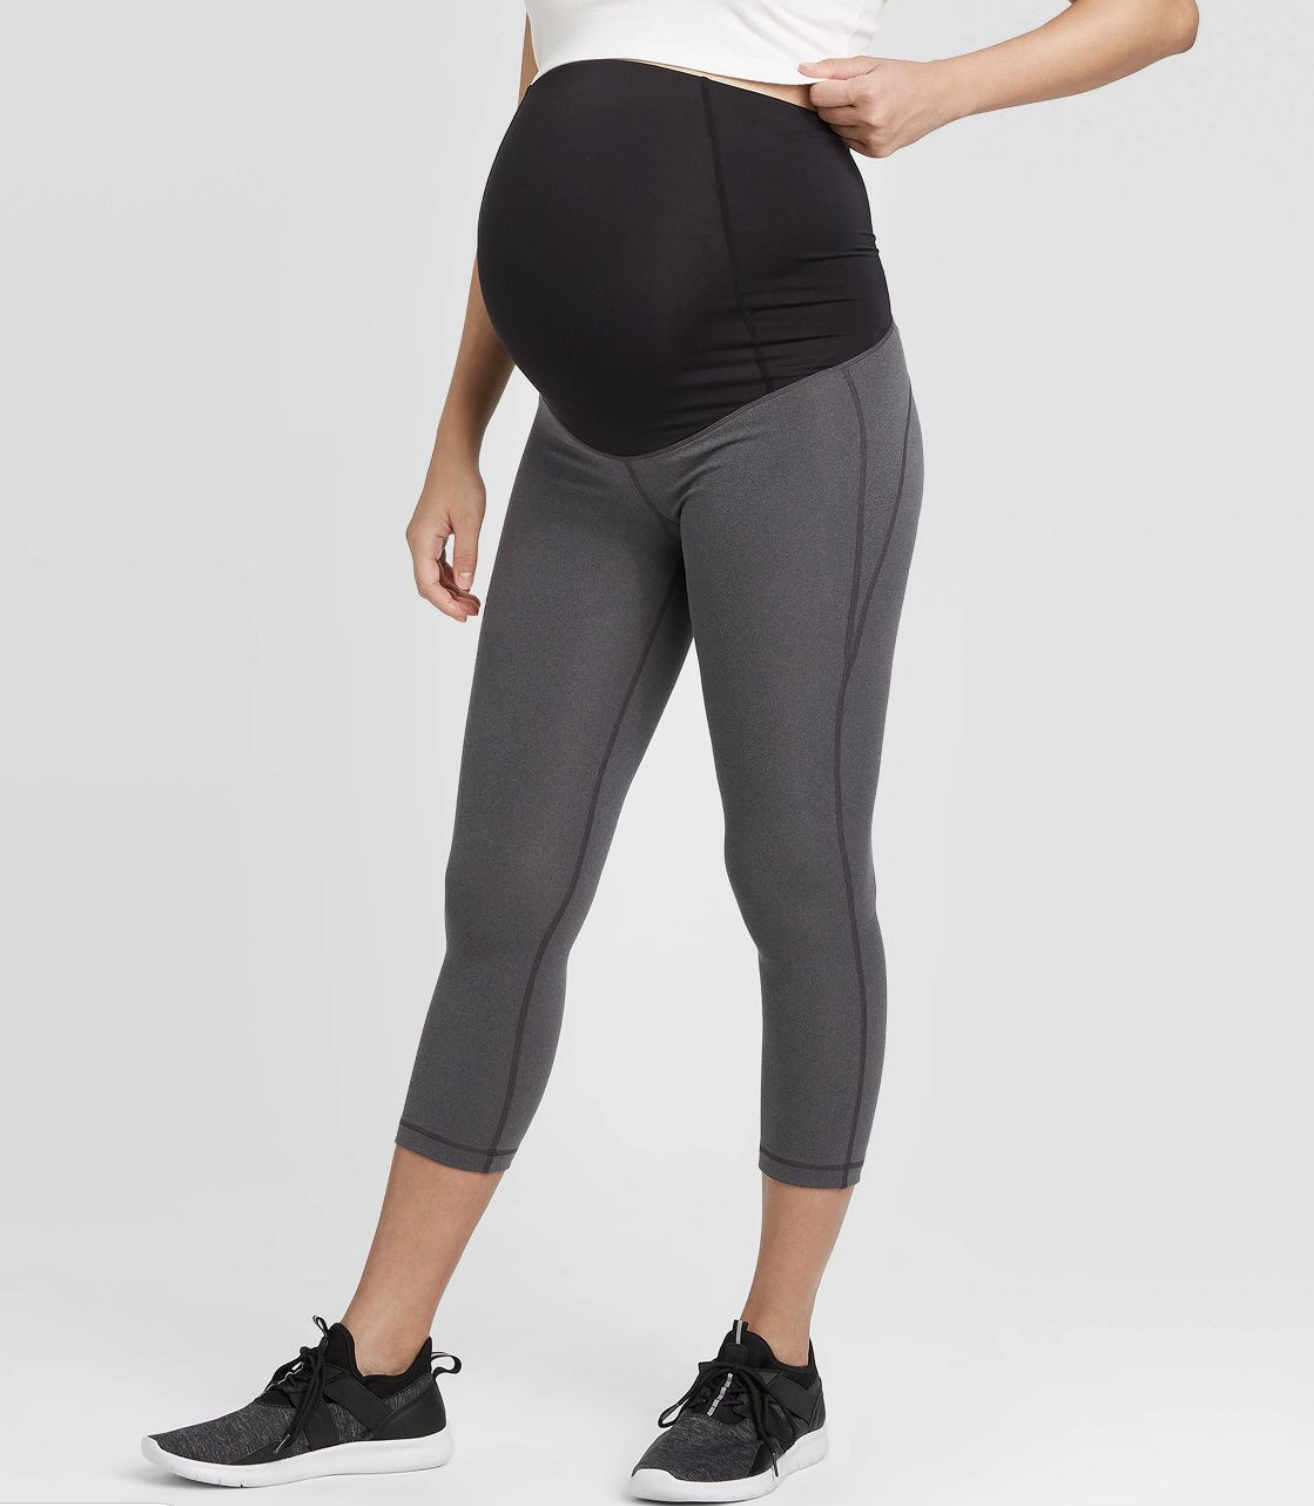 Isabel Maternity by Ingrid & Isabel Crossover Panel Active Capri Maternity Pants | Maternity Workout Clothes